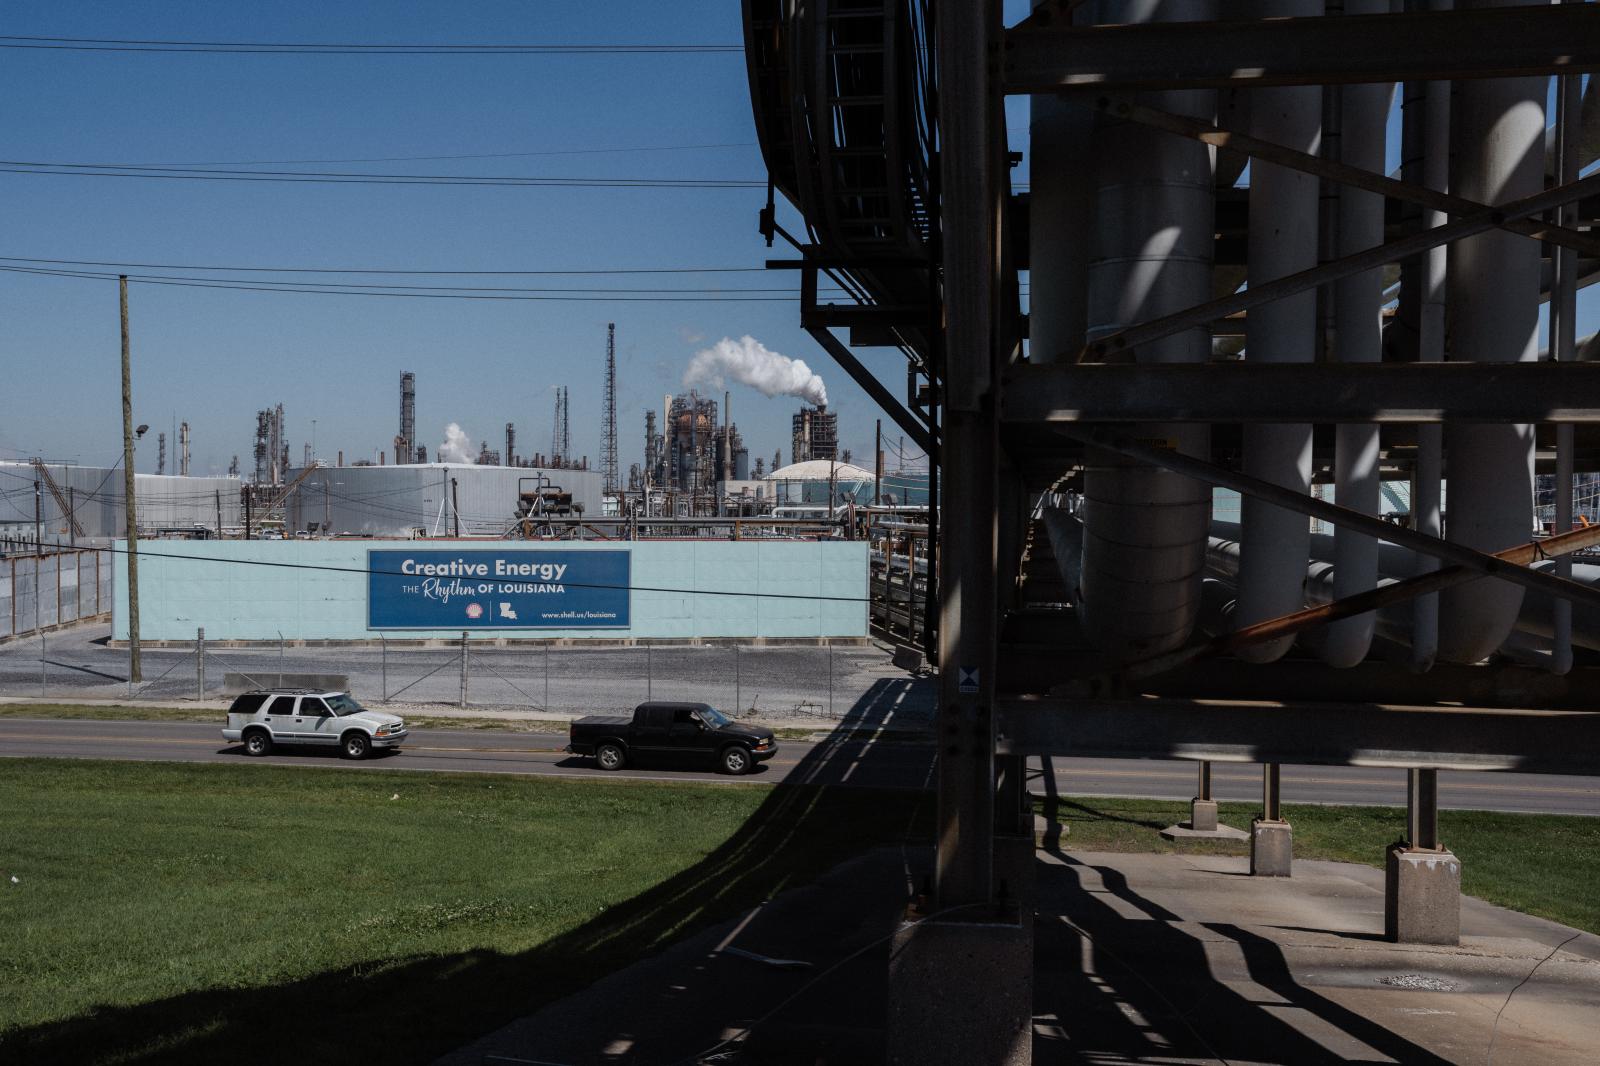 Behind the Plants: The Americans of Cancer Alley - Advertising on a shell refinery plant. Geismar United States